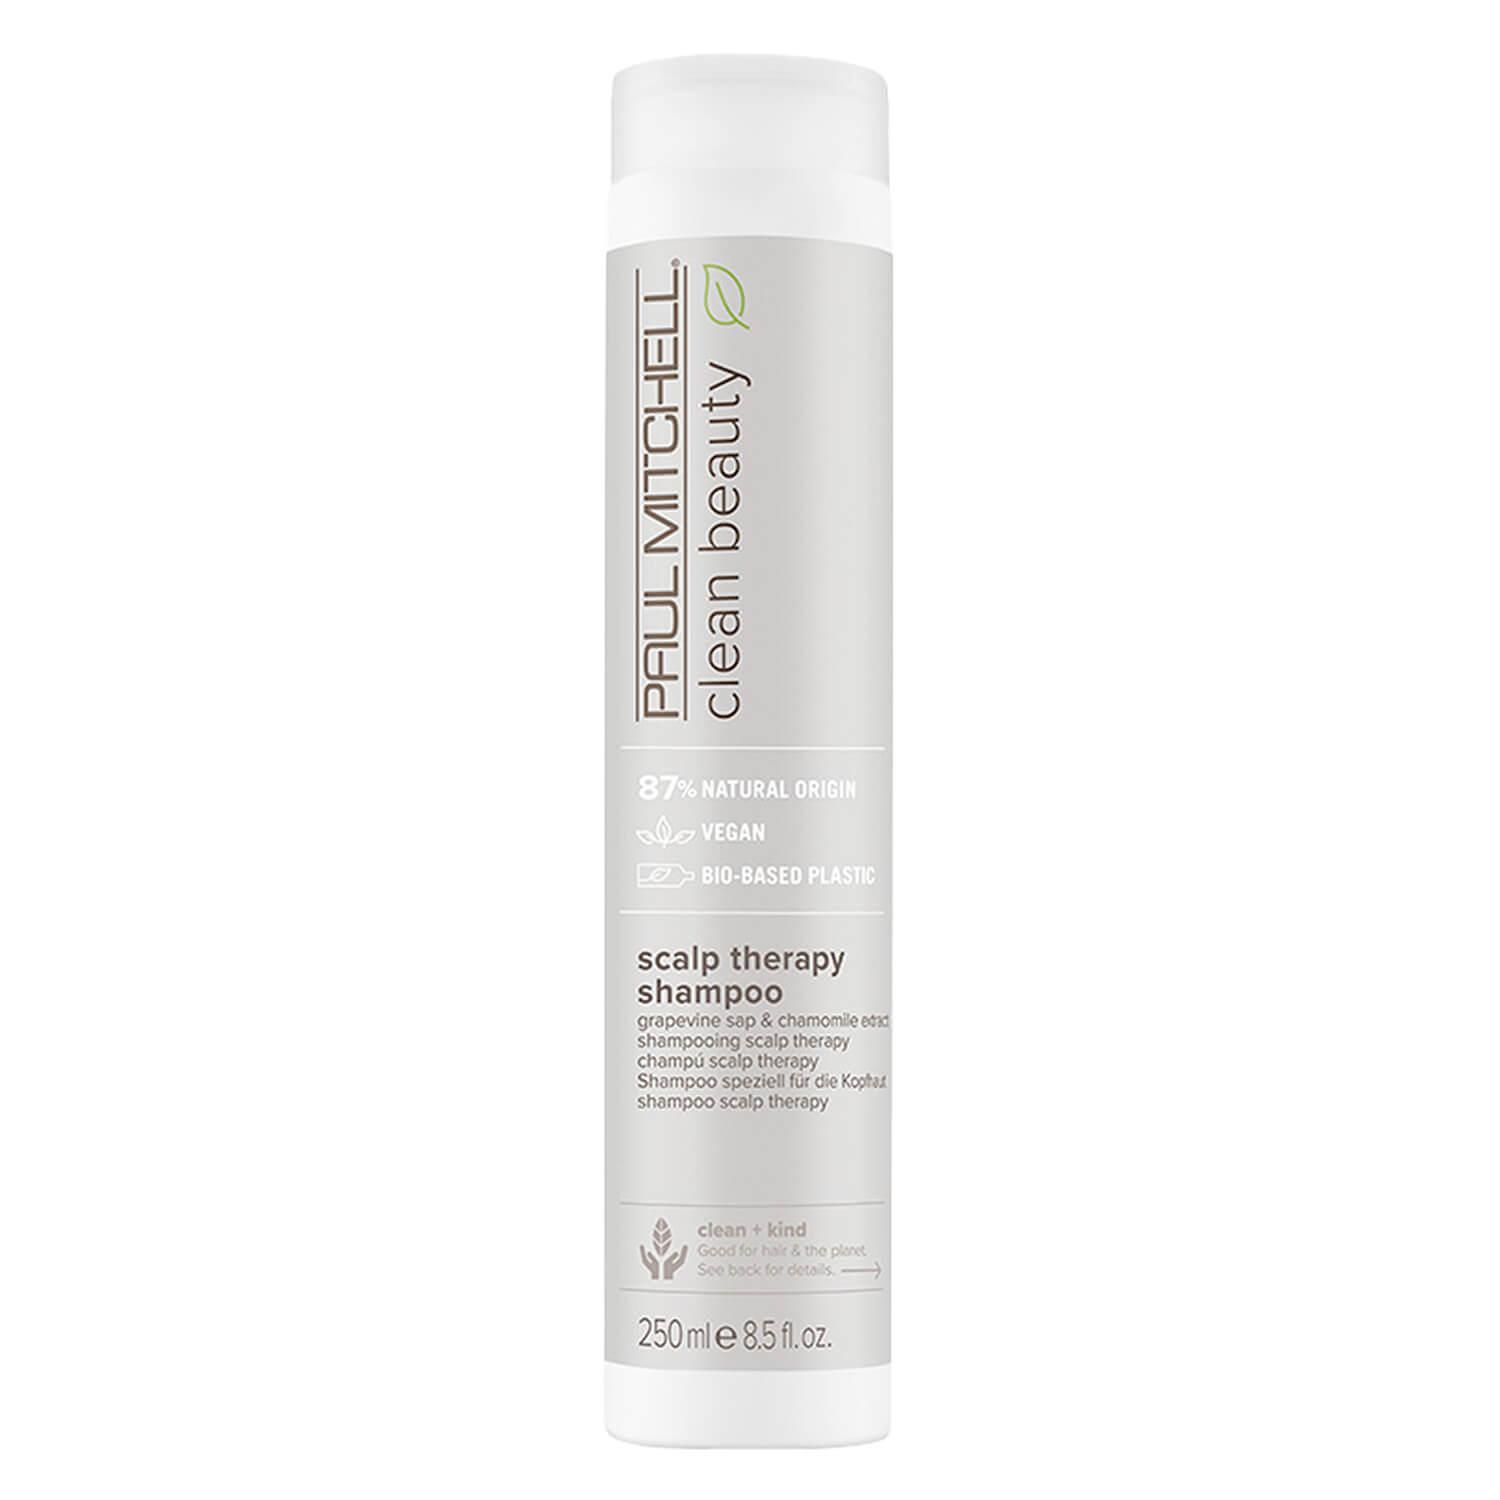 Paul Mitchell Clean Beauty - Scalp Therapy Shampoo